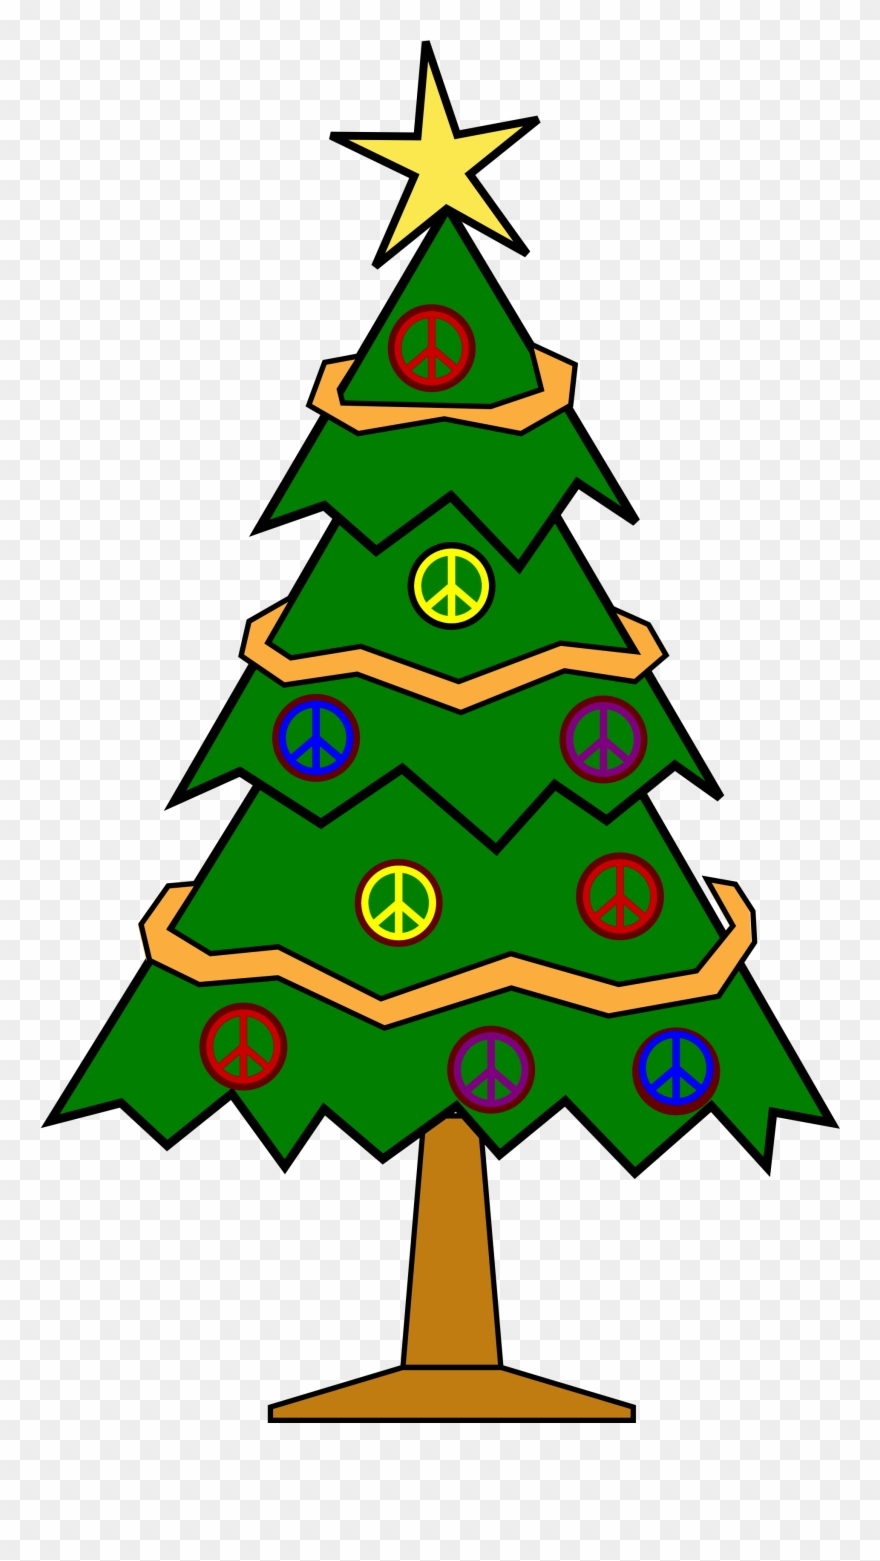 Clipart Transparent Stock Christmas Tree And Presents.